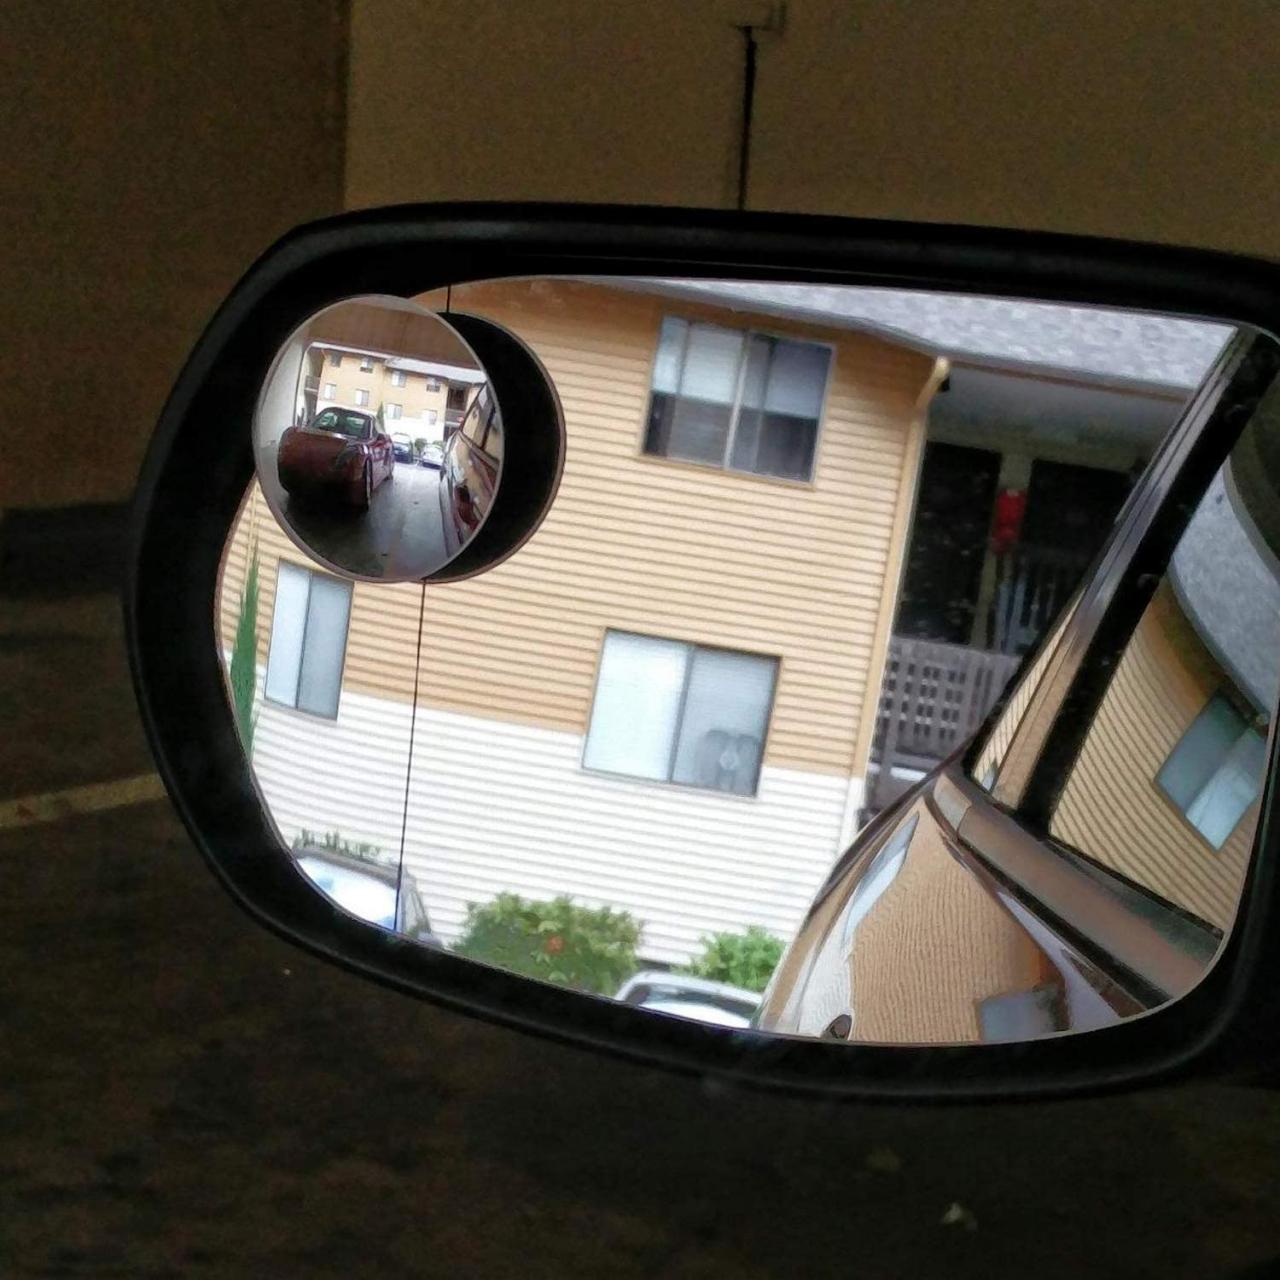 Buy Ampper Blind Spot Mirror, 2 Round HD Glass Convex Rear View Mirror,  Pack of 2 Online in Hong Kong. B01CV4ANCC